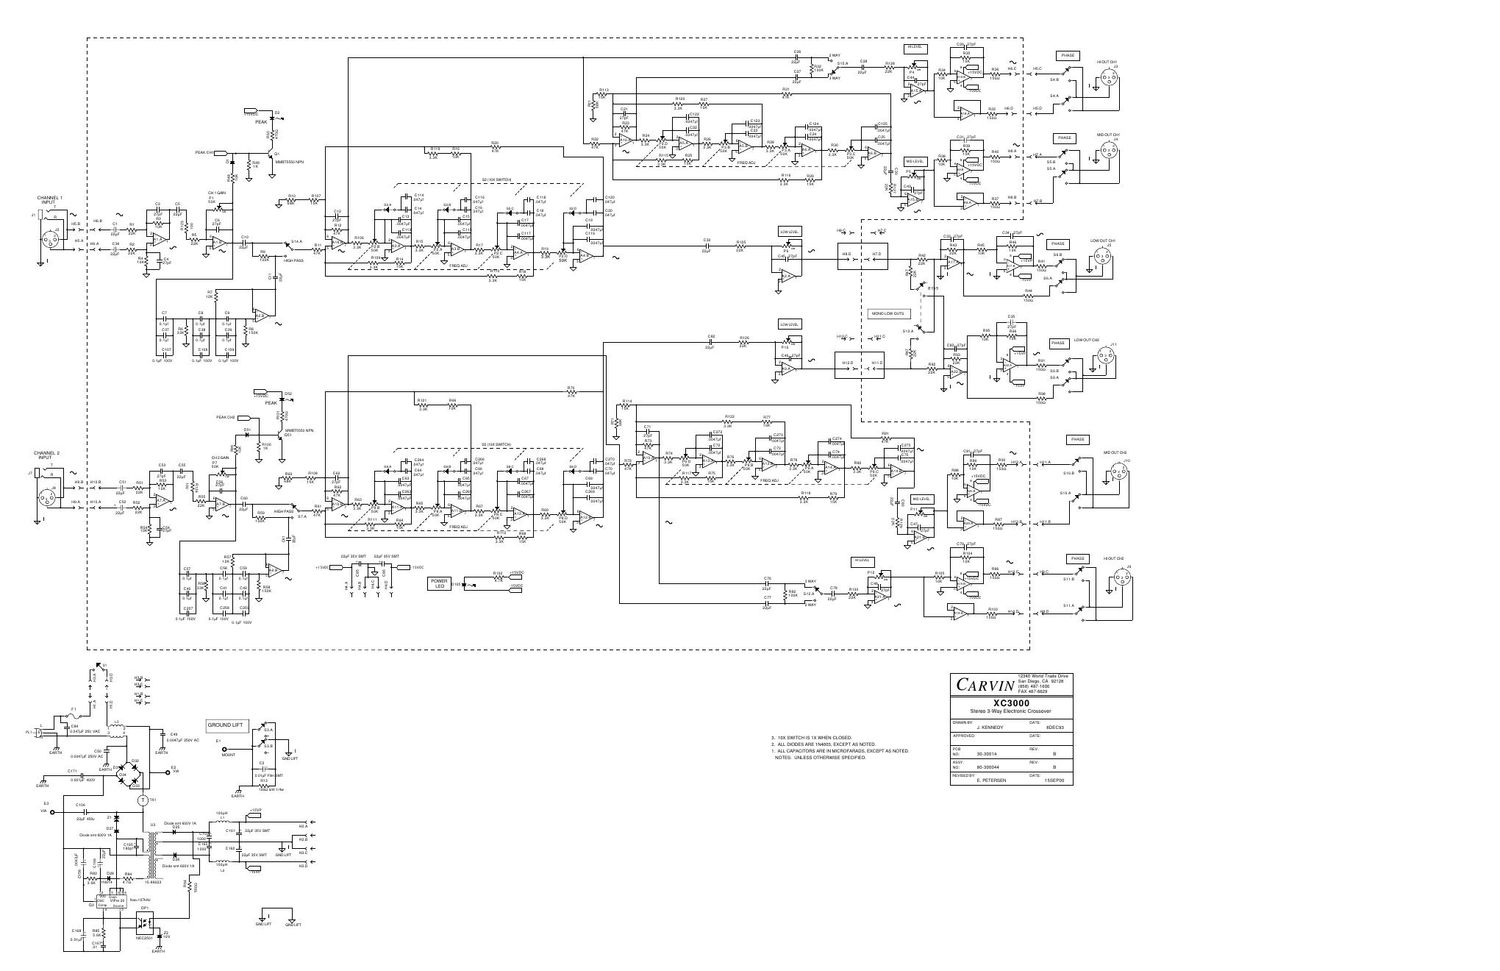 carvin xc 3000 stereo 3 way crossover schematic